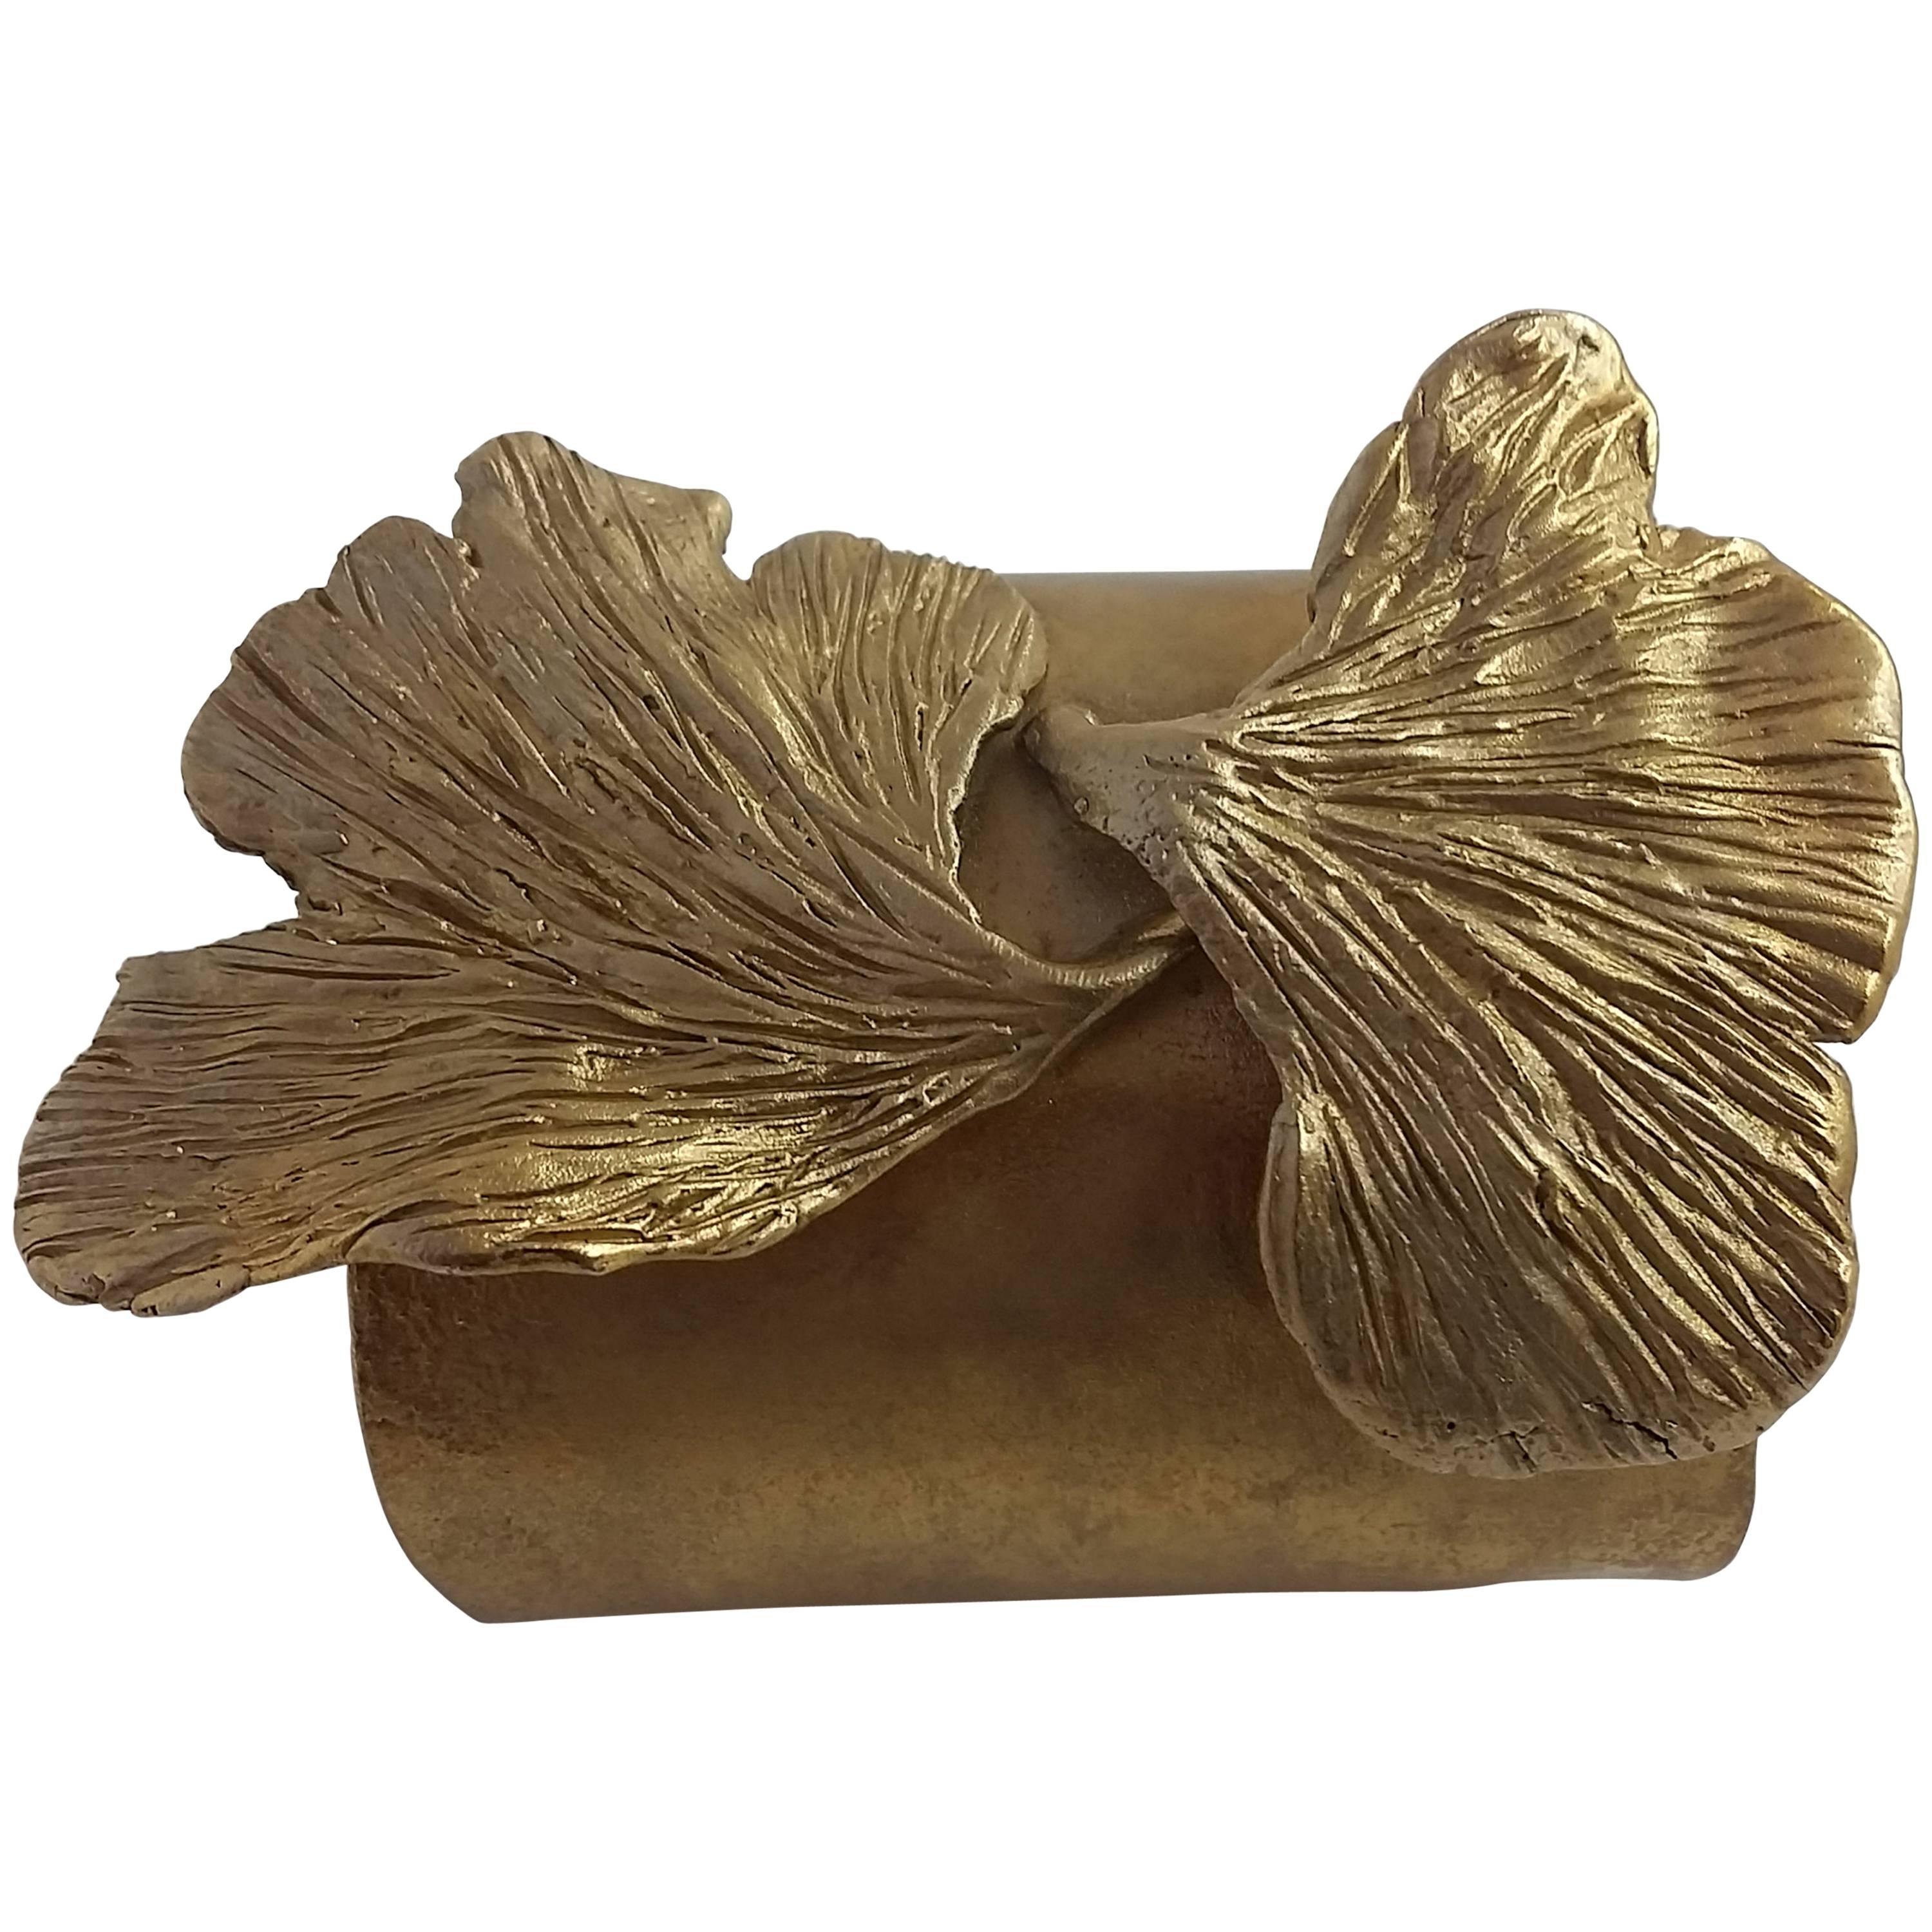 2014 Ania Pabis Silver Gold Plate Gingko Bracelet For Sale